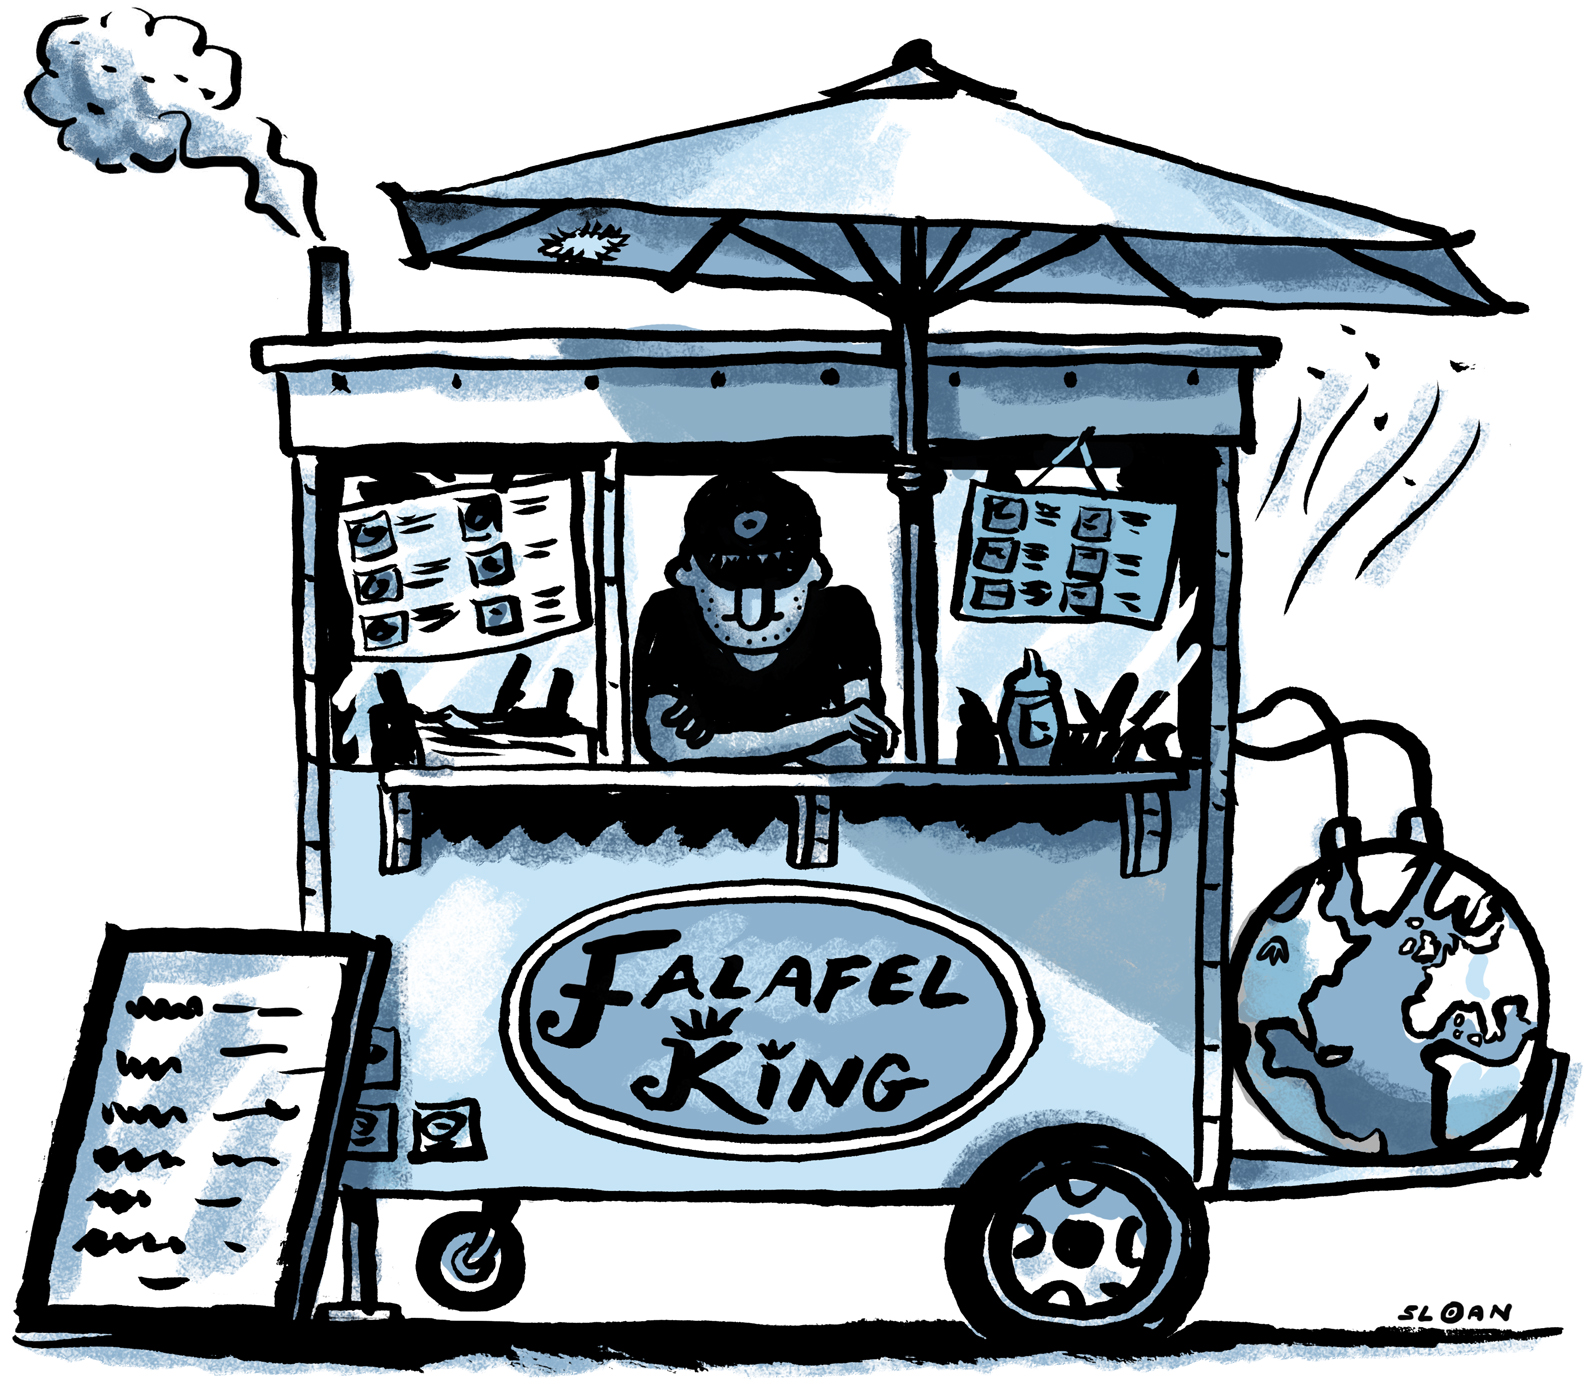 Food carts and their impact on the environment. 